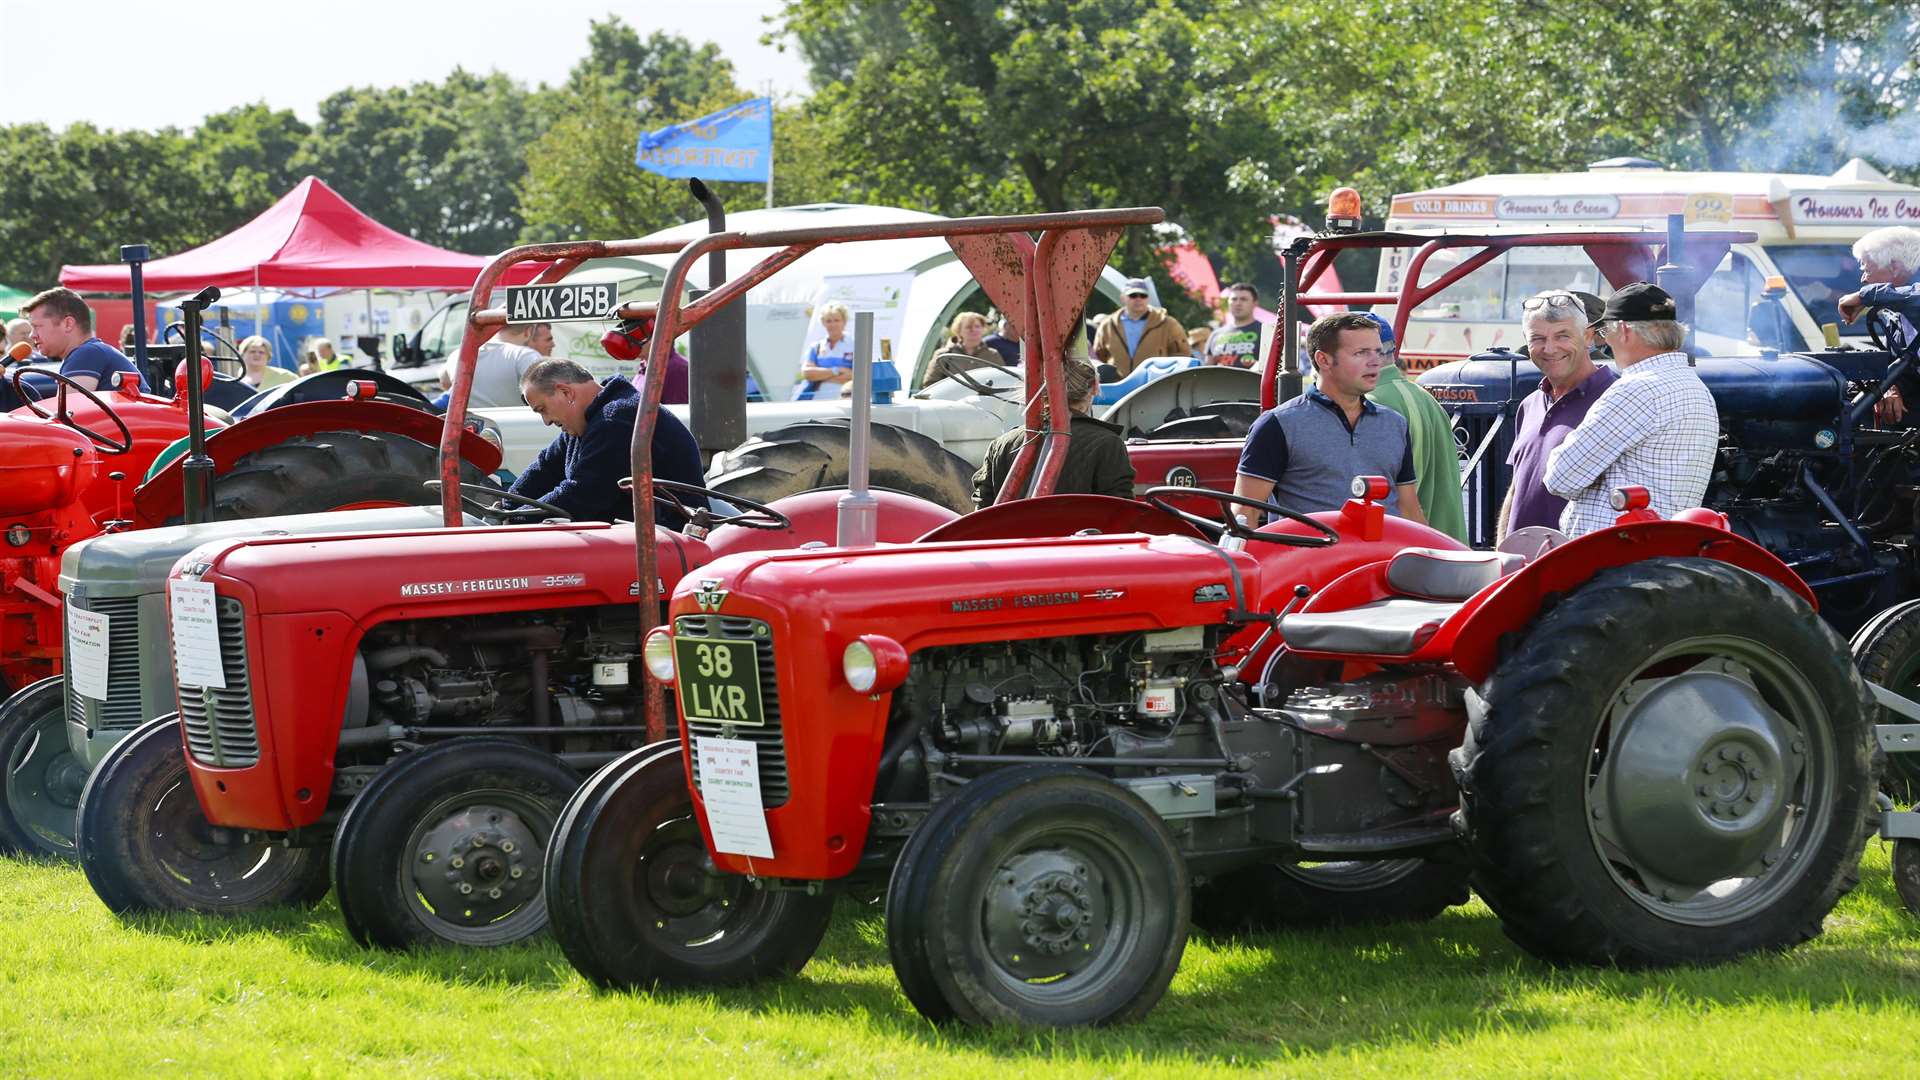 It's a Tractorfest at Biddenden this weekend Picture: Martin Apps